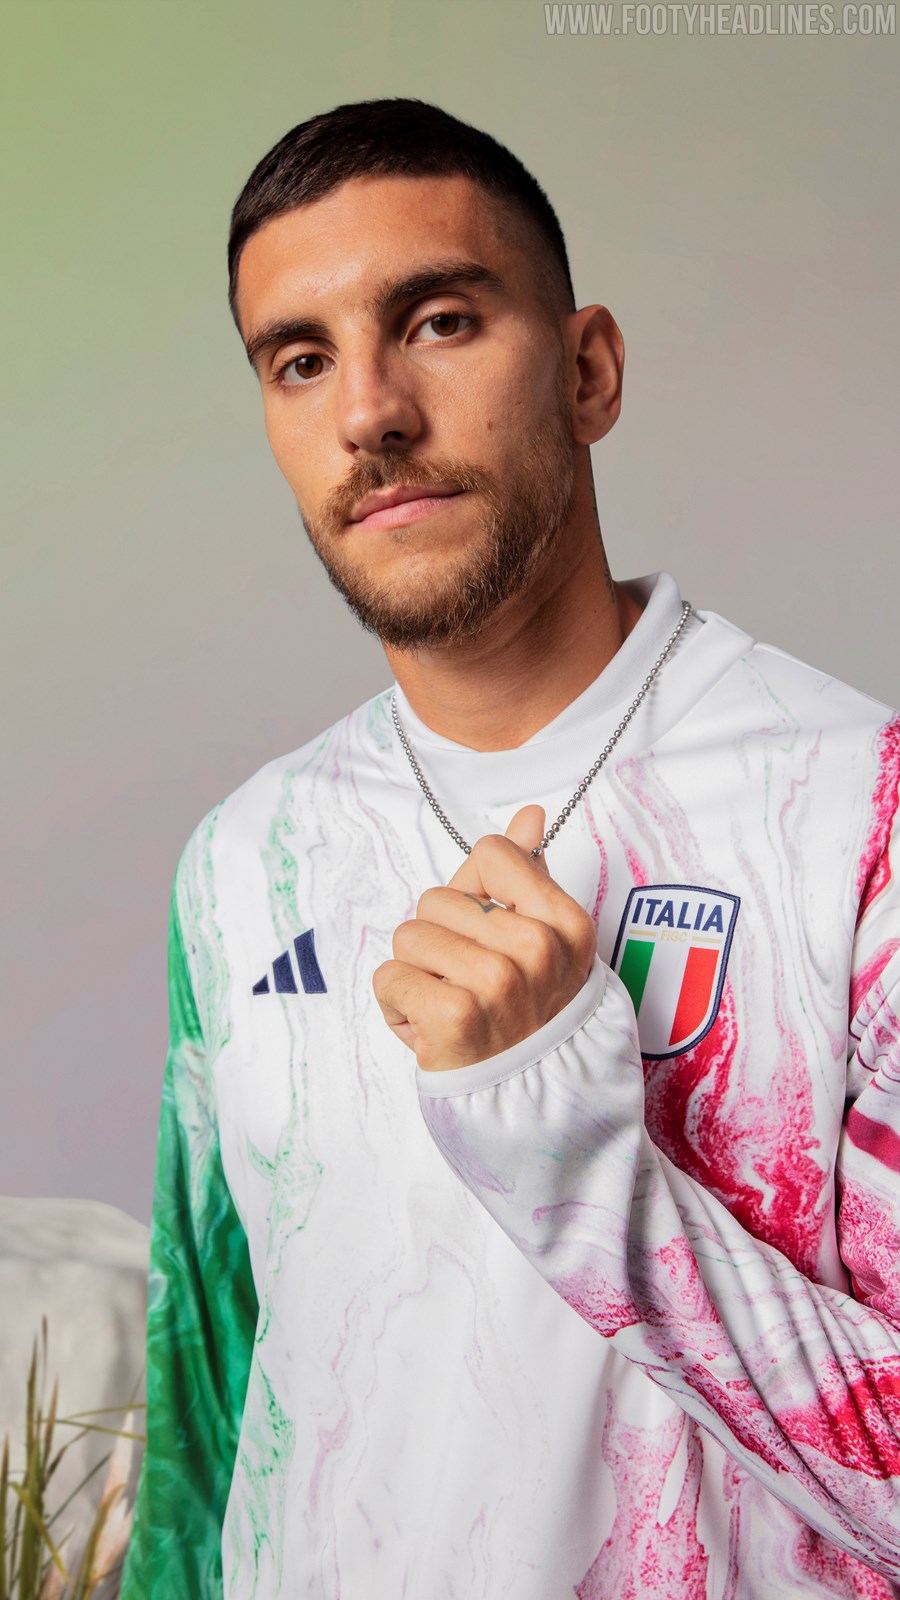 adidas Italy 2023 Prematch Jersey - White / Green / Red